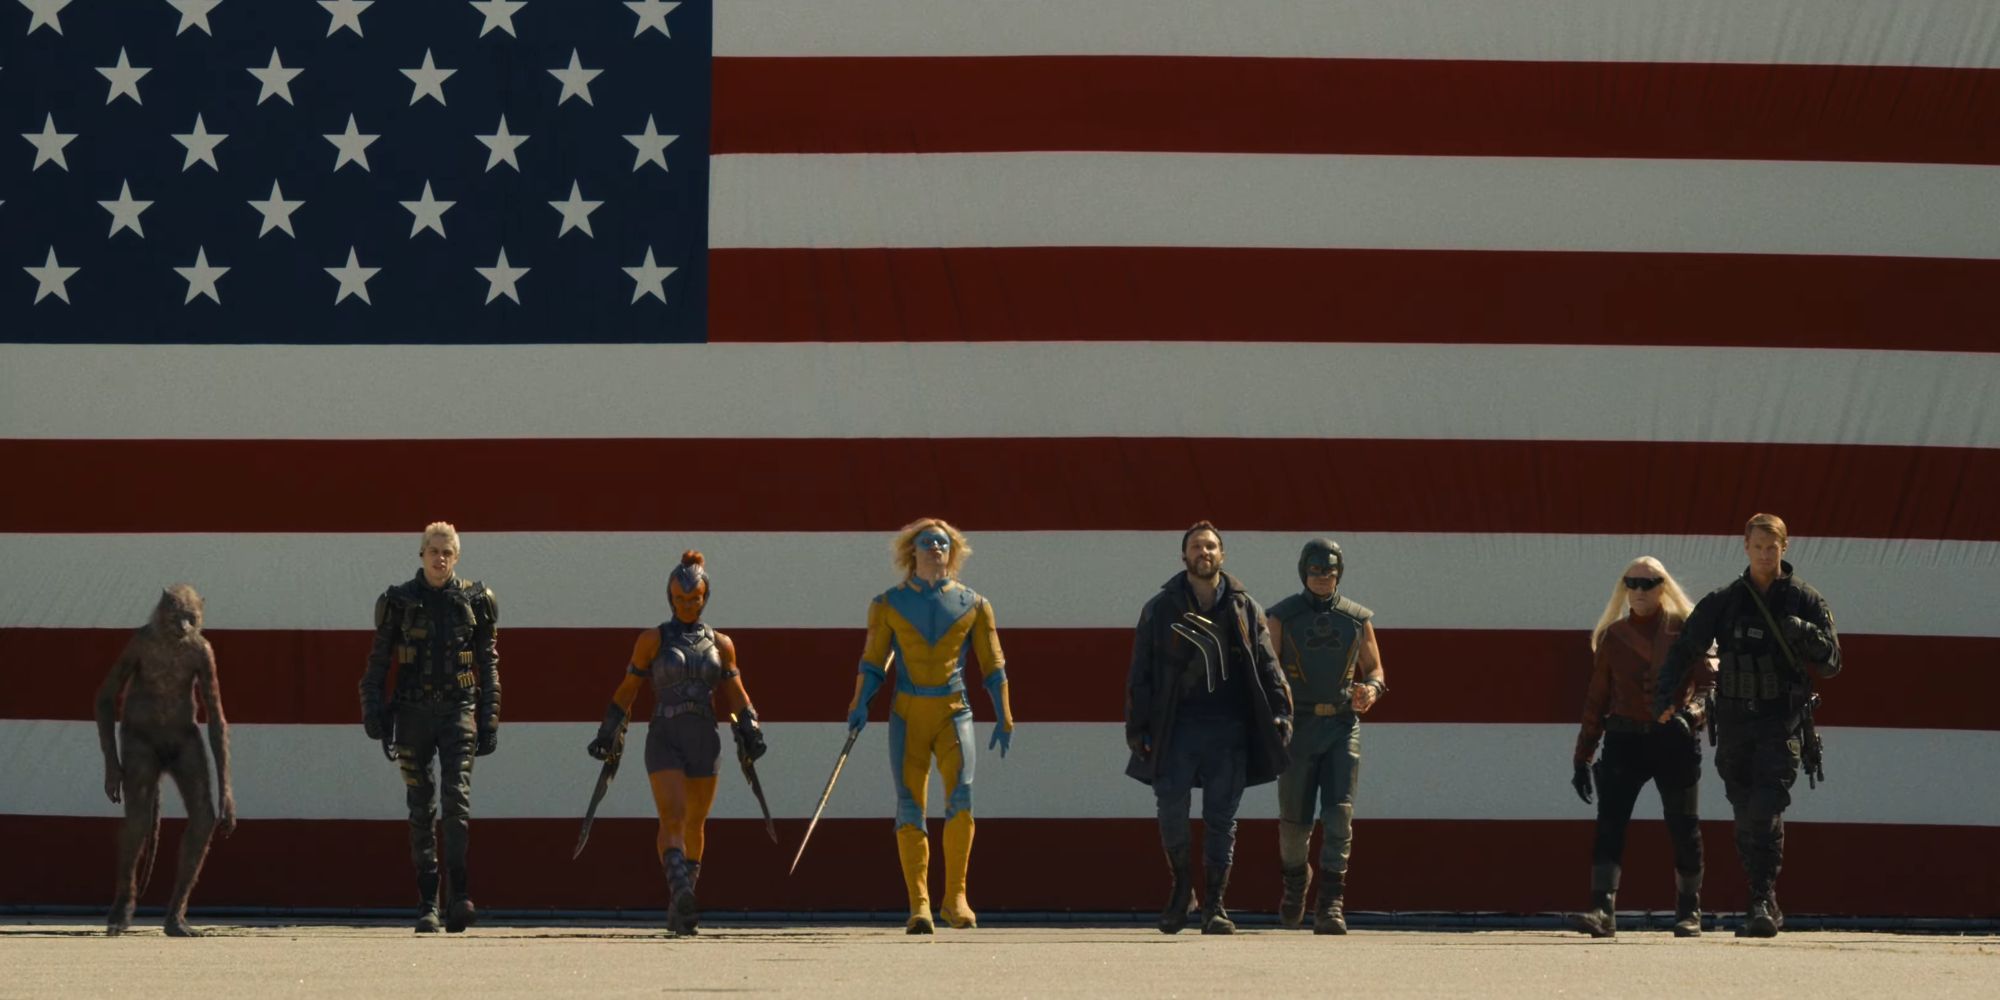 Team 1 of Task Force X marching in line in James Gunn's The Suicide Squad (2021)